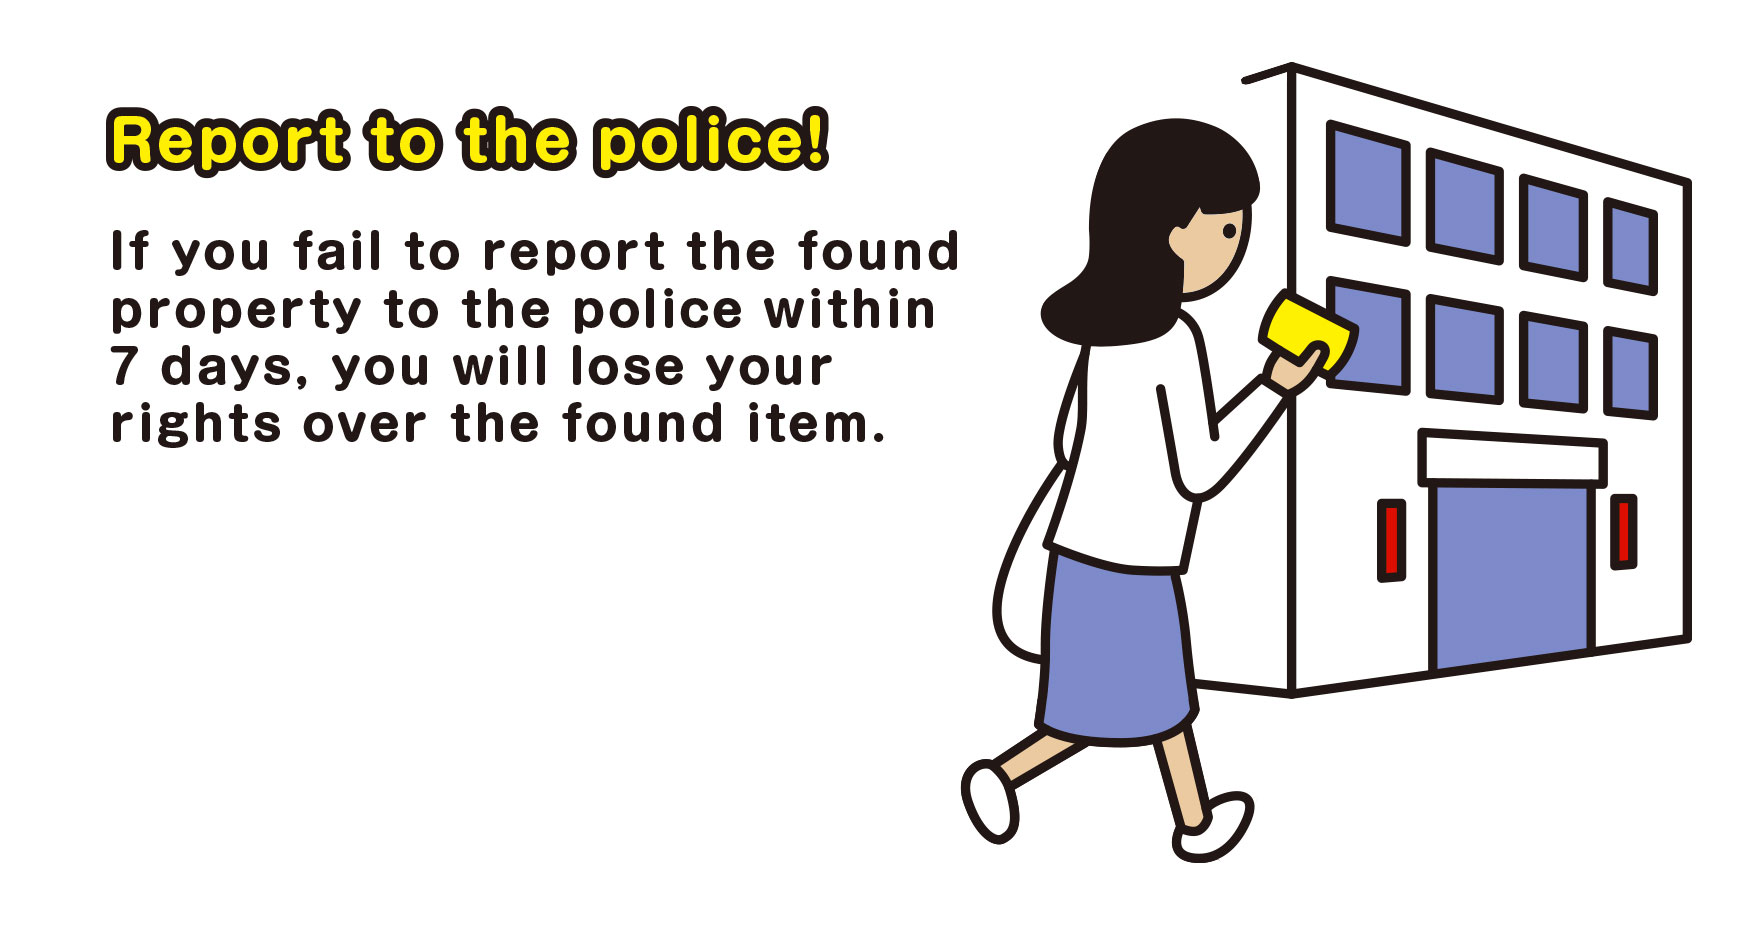 Report to the police！　If you fail to report the found property to the police within 7 days, you will lose your rights over the found item.